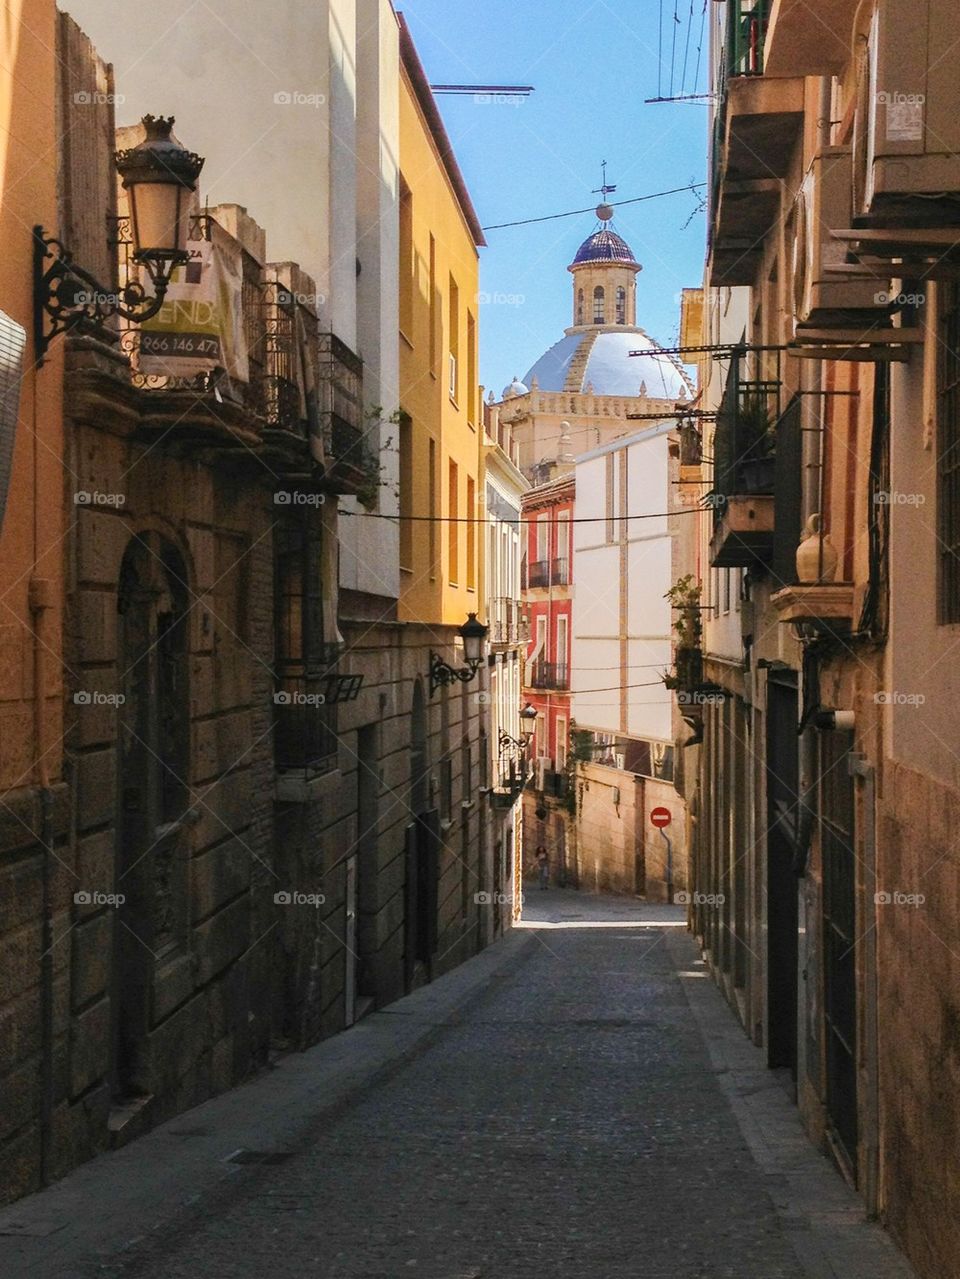 Alley of old town in Alicante, Spain